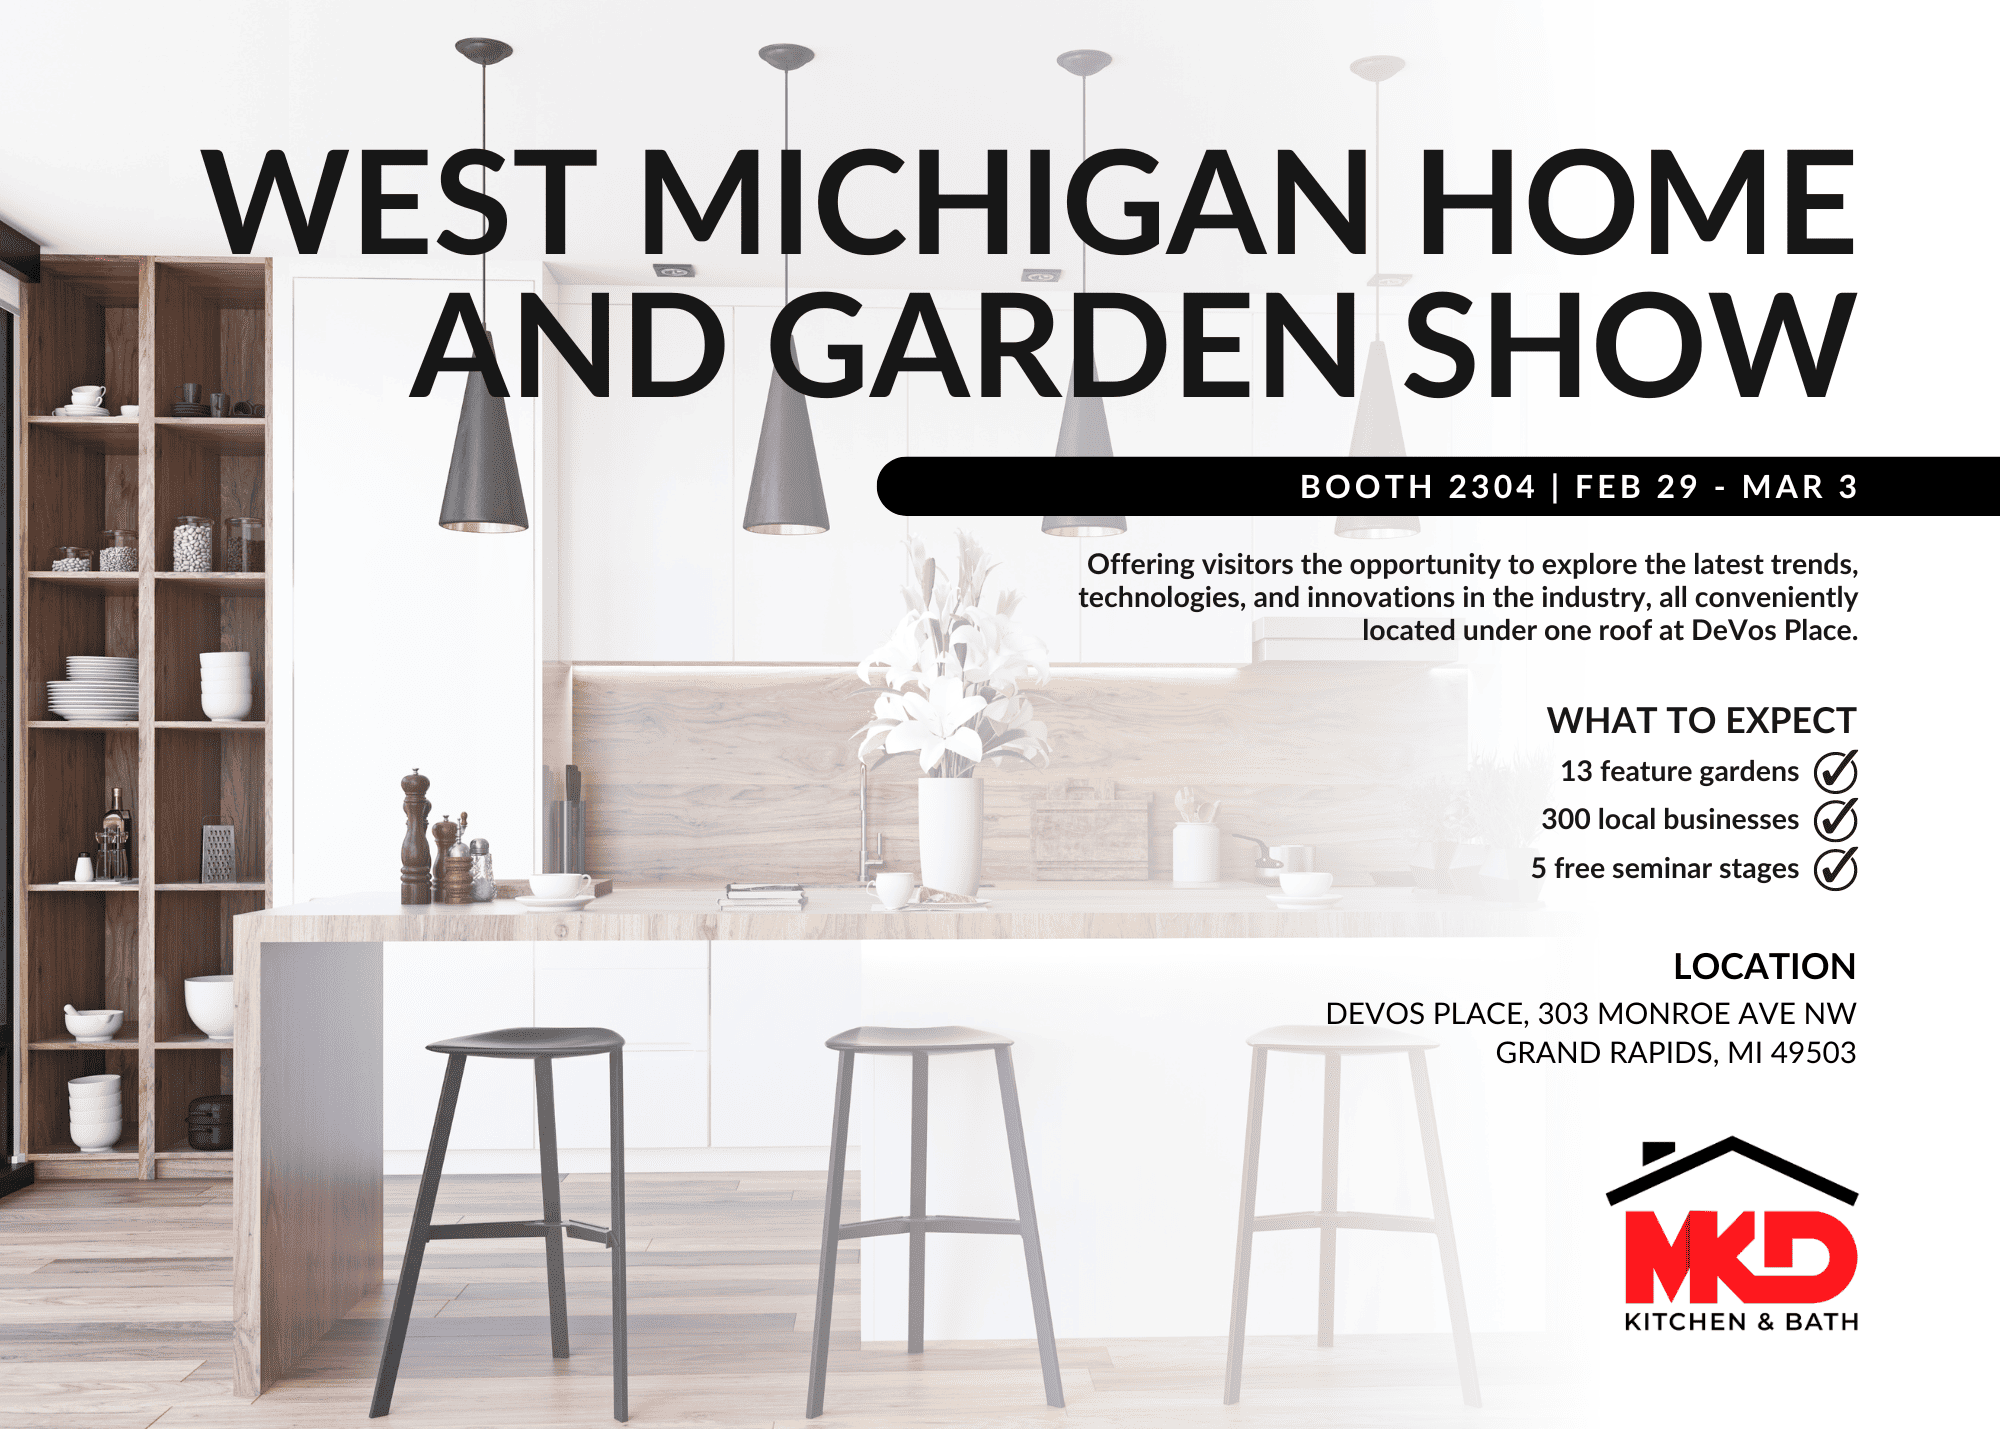 MKD Kitchen and Bath to Showcase Innovative Designs at the West Michigan Grand Rapids Home and Garden Show